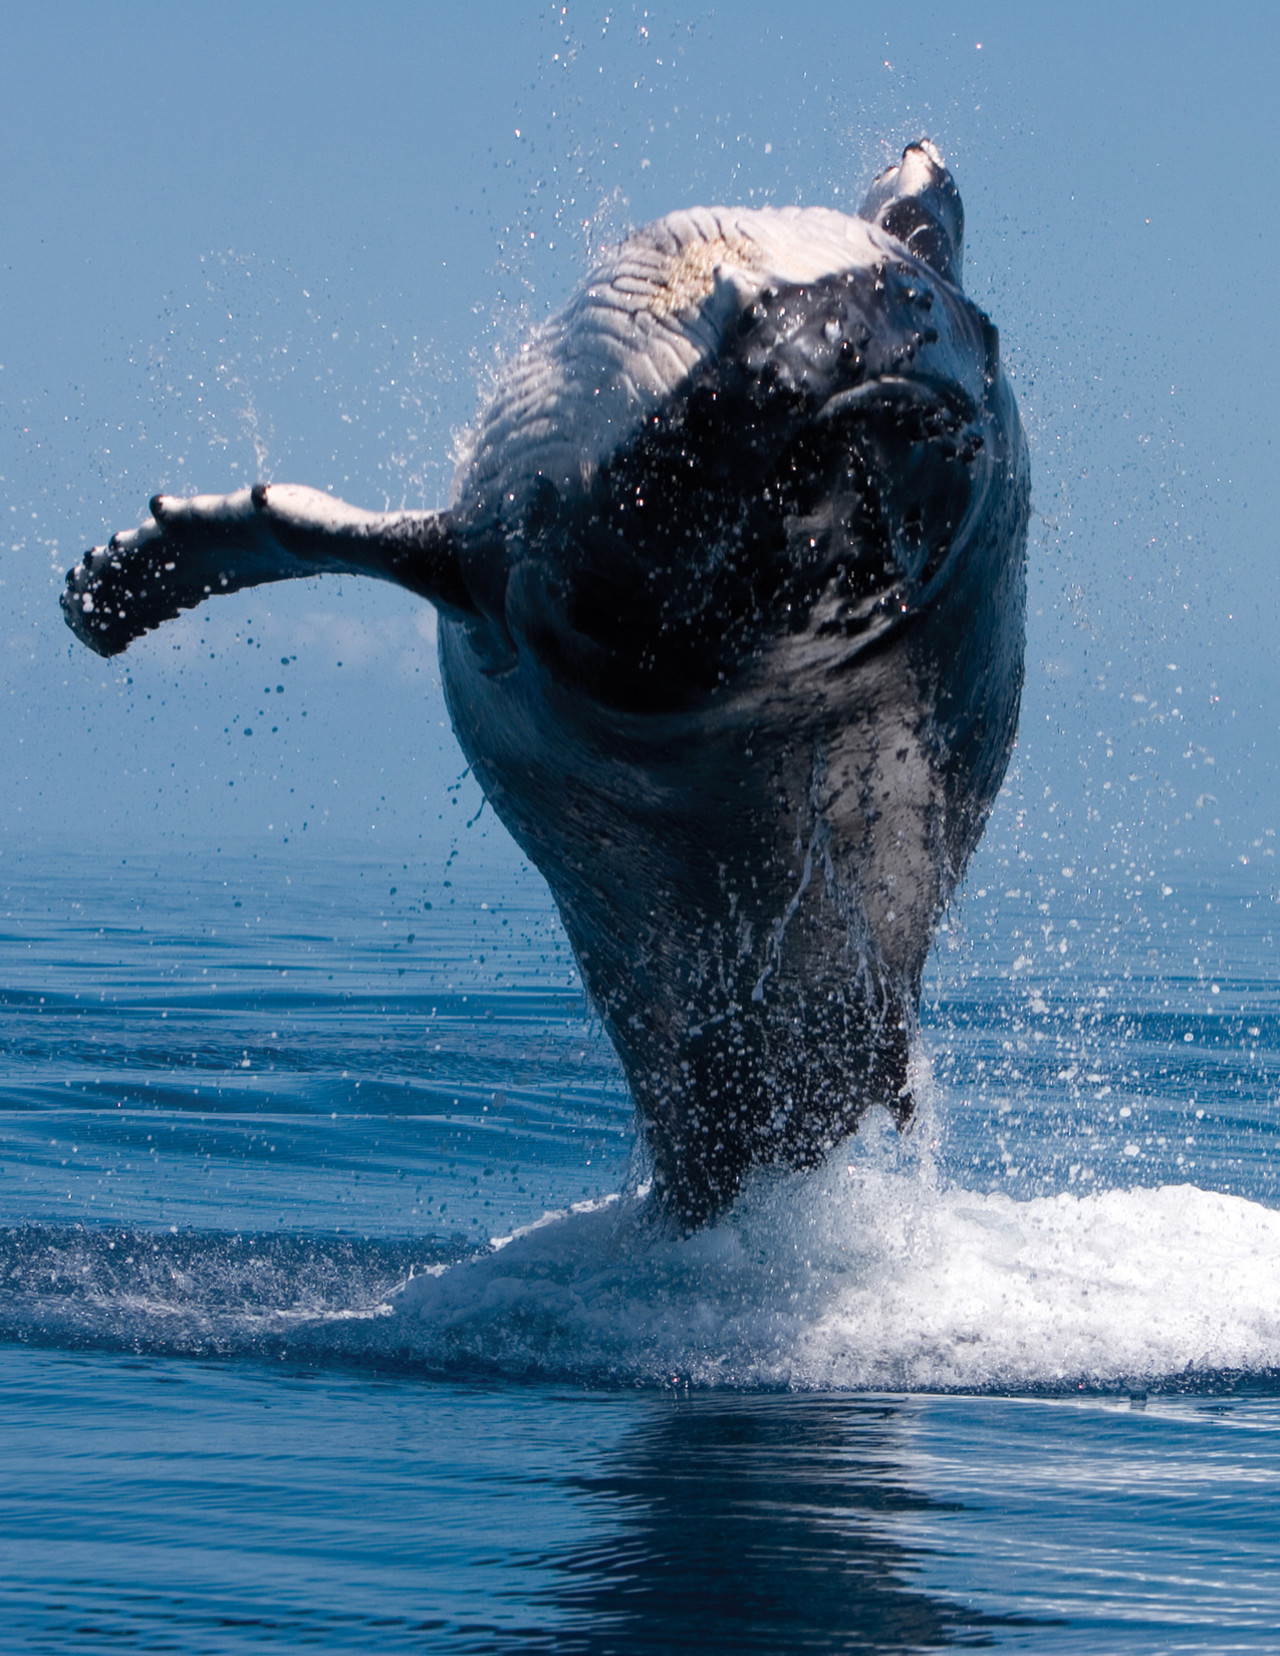 Four Seasons Resort Maui Says, “Listen to the Humpback Whales -- They